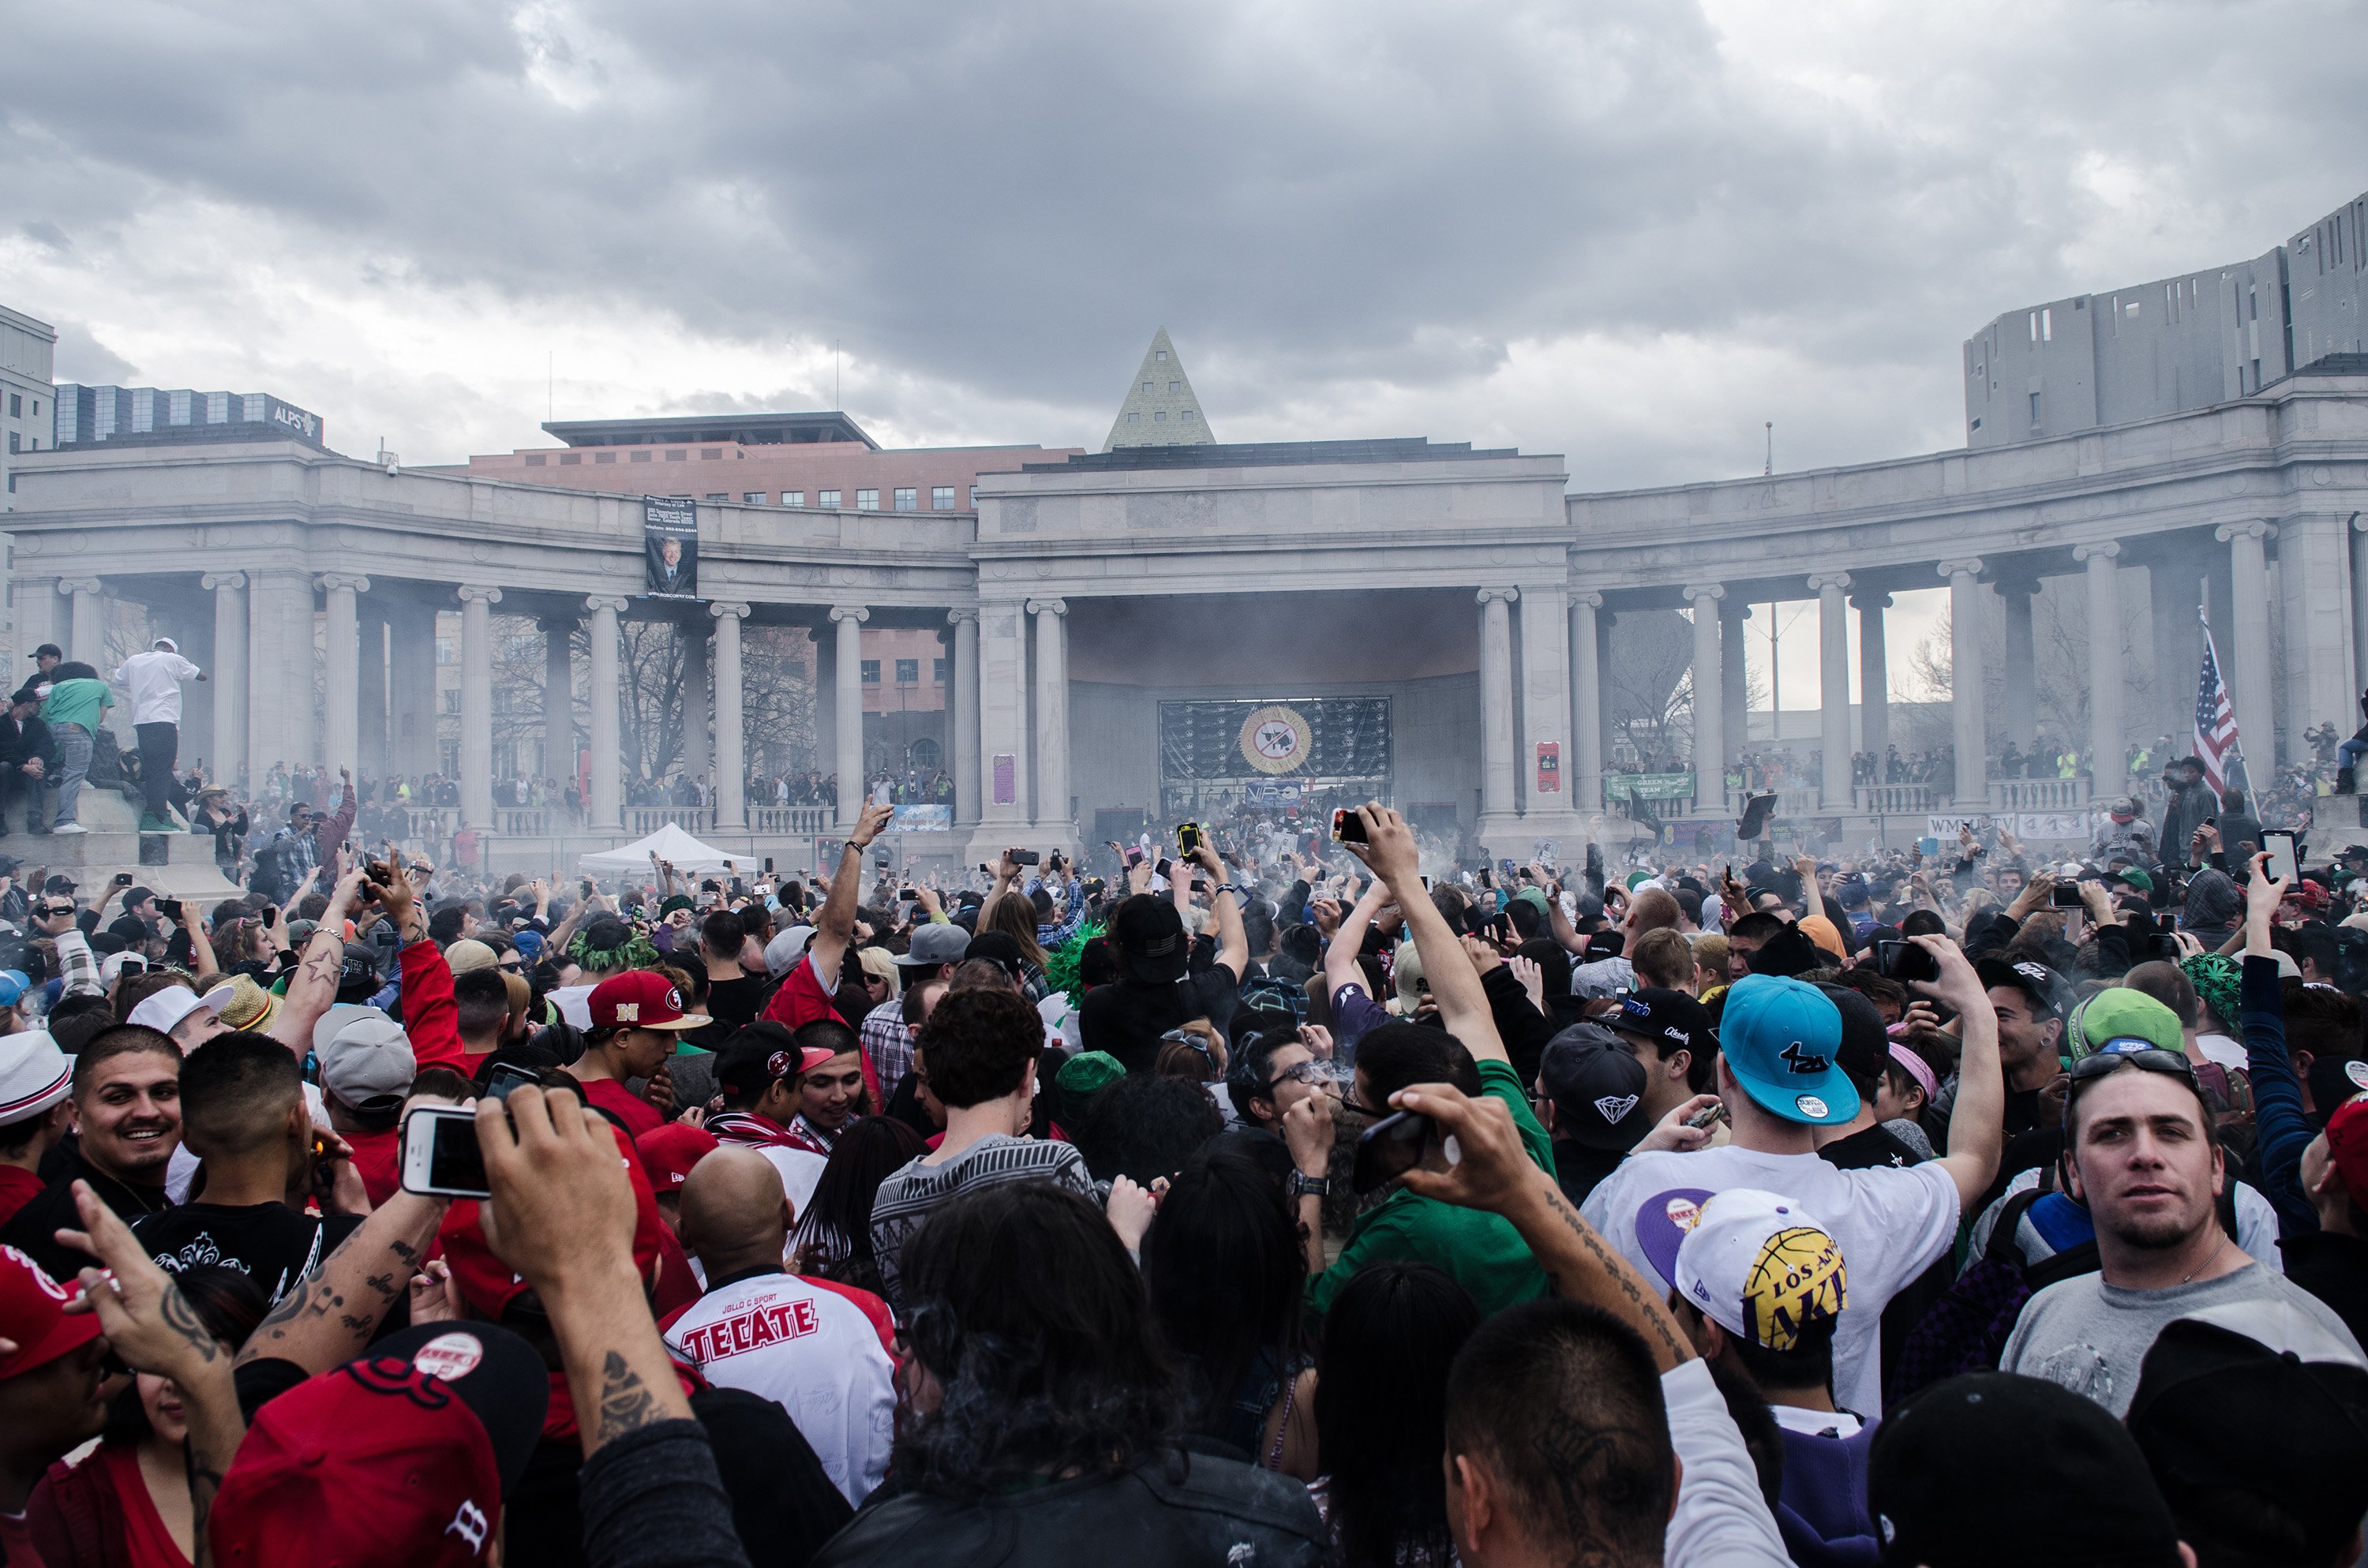 Crowd shot of the 420 celebration at the Civic Center in Denver, Colo. on April 20, 2013. (Larry Hulst—Getty Images)